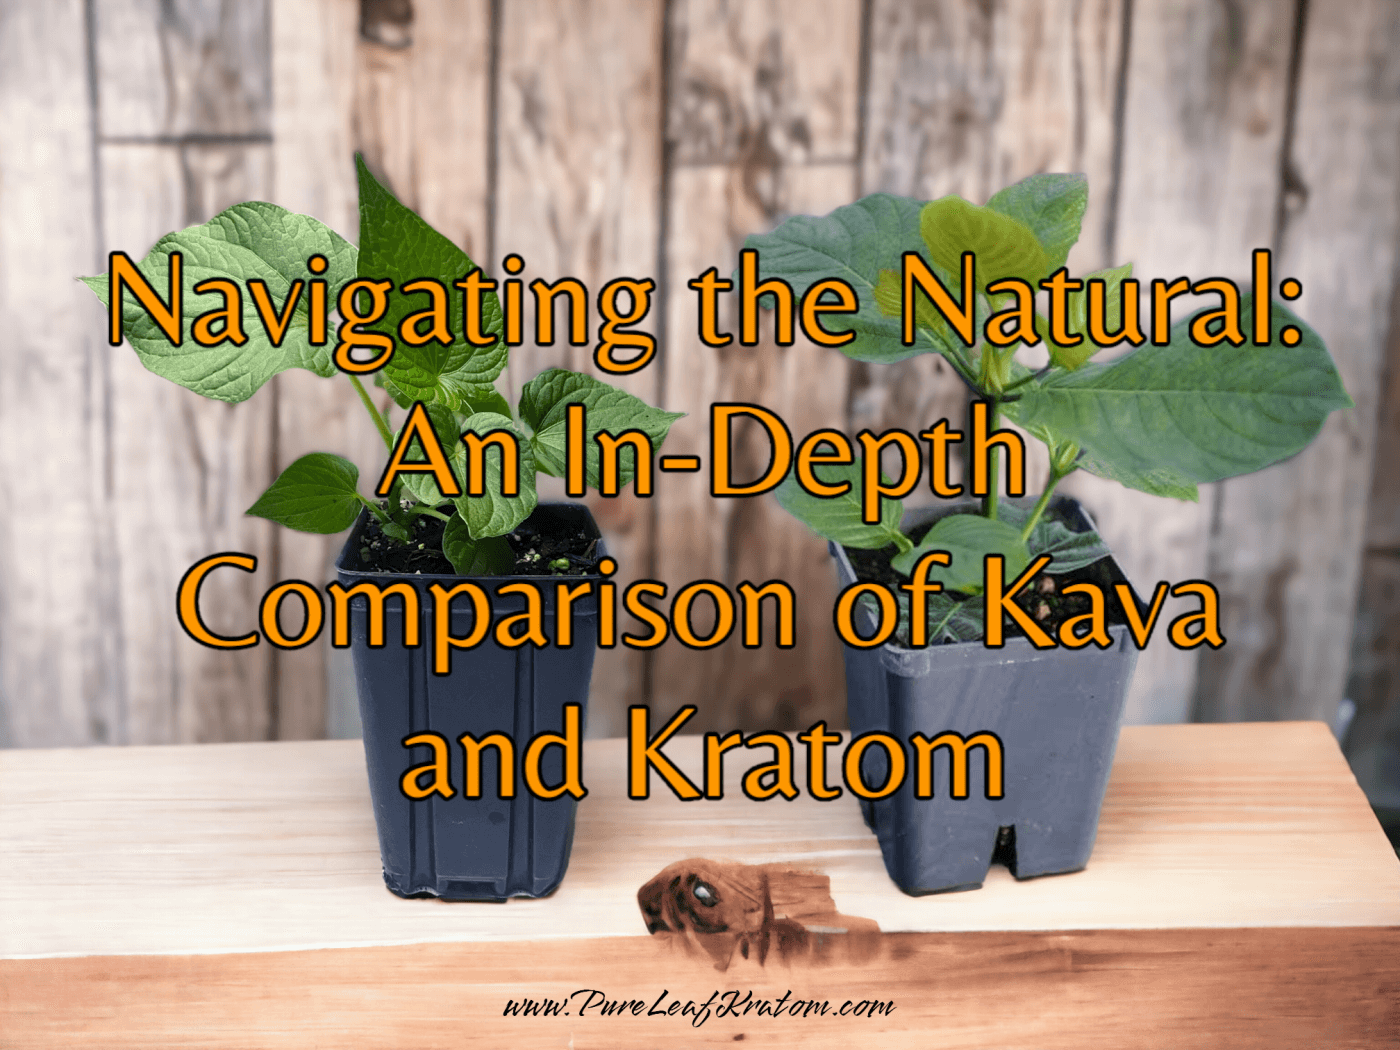 Navigating the Natural: An In-Depth Comparison of Kava and Kratom